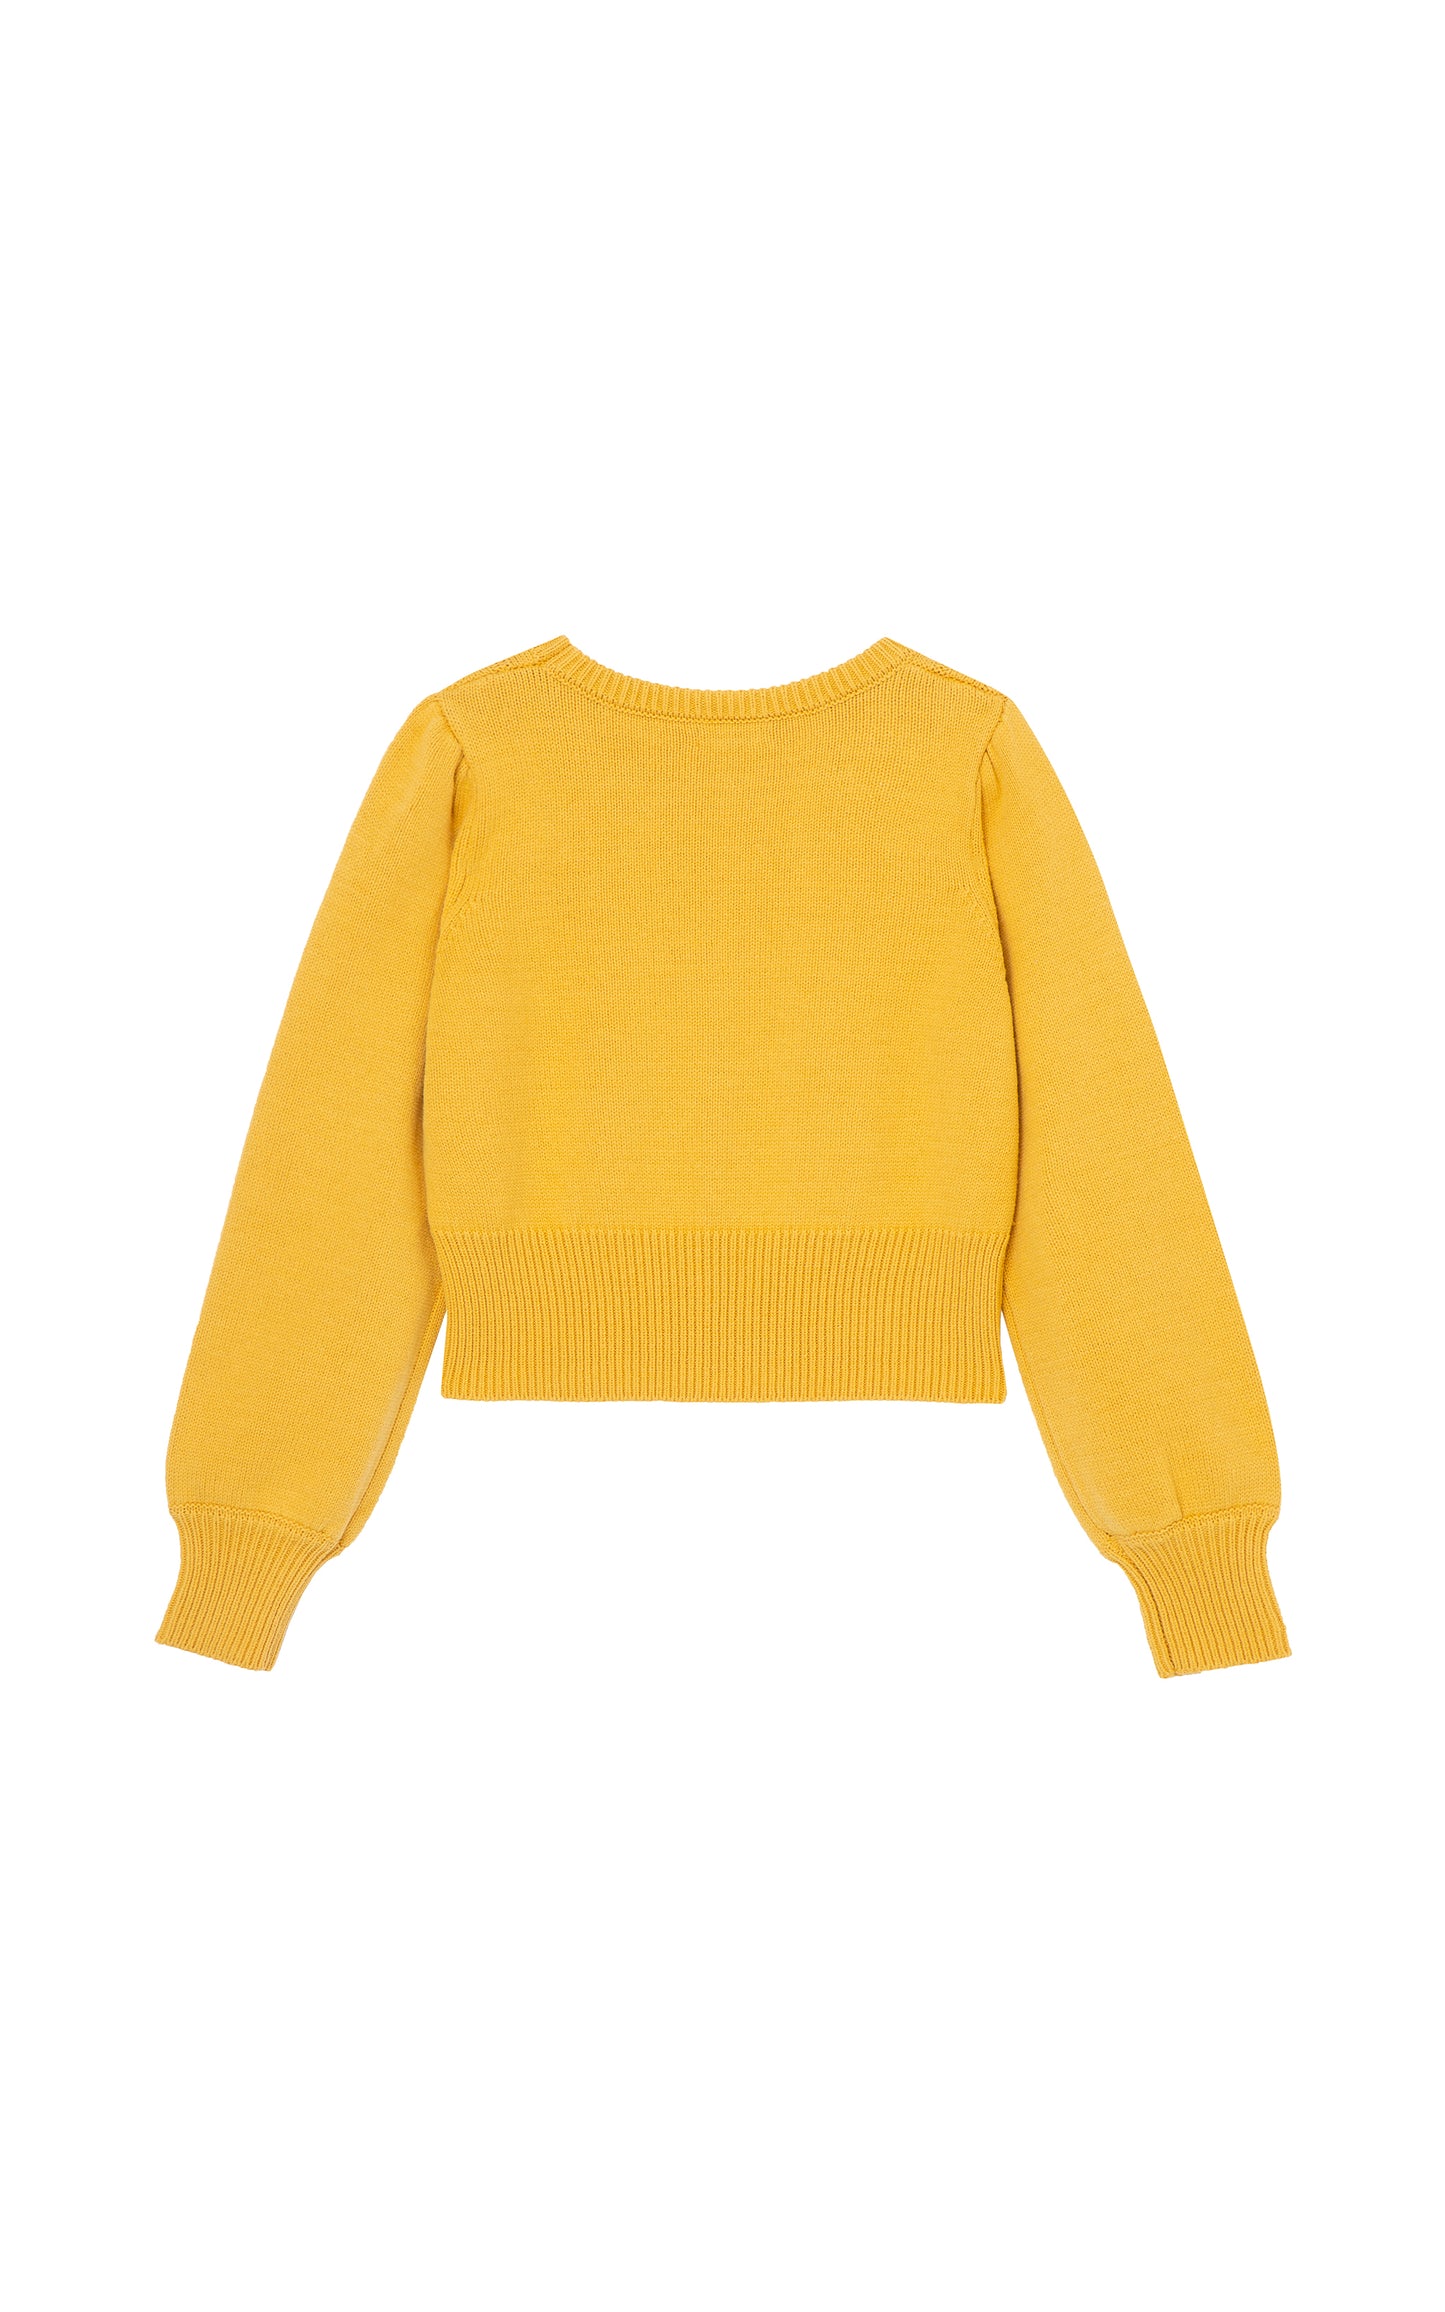 Back view of a yellow cable-knit sweater with fringe detailing